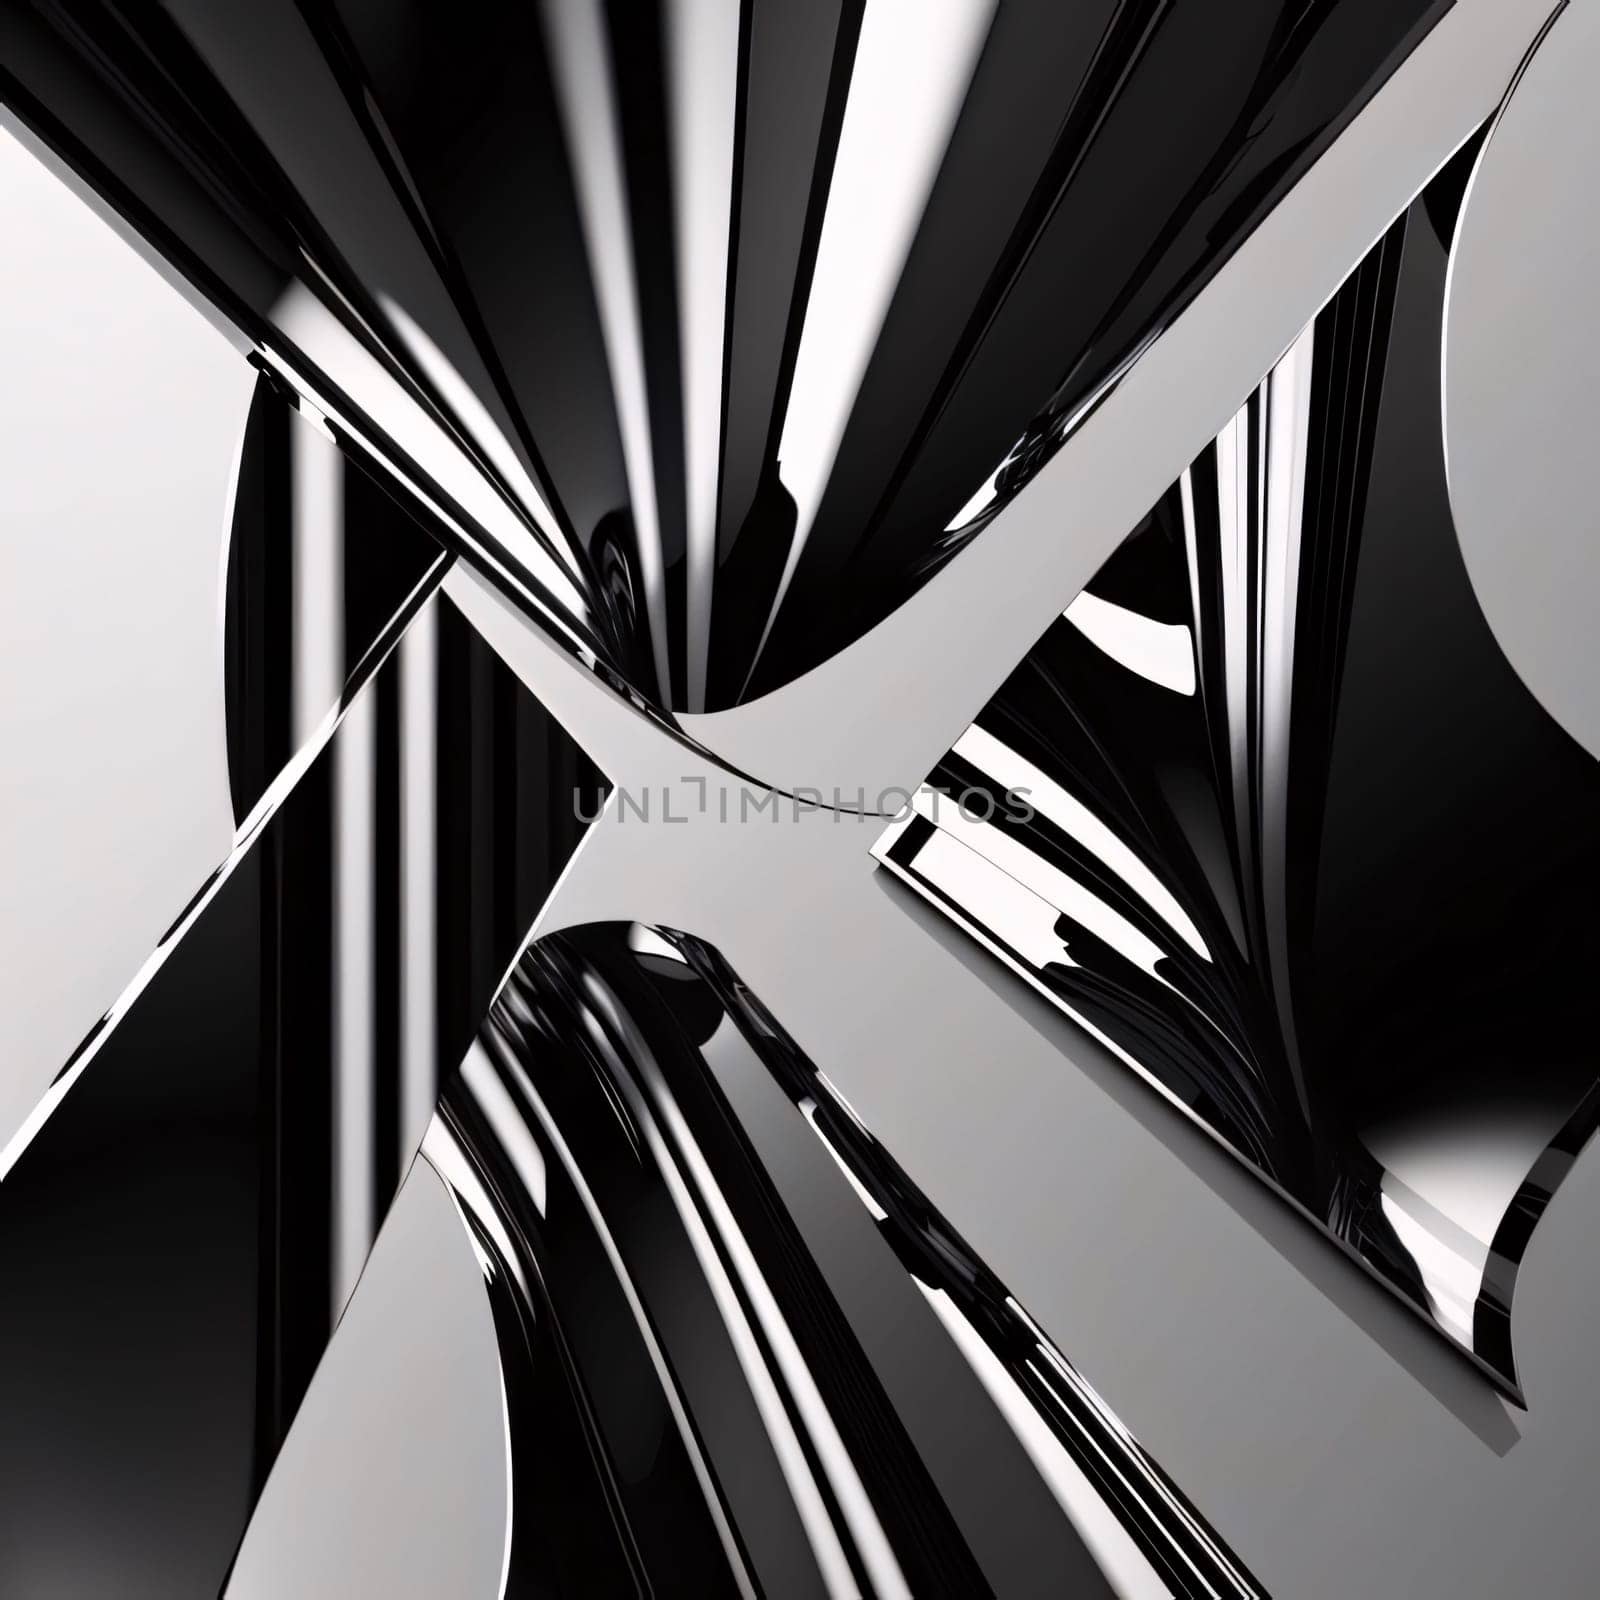 Abstract background design: Abstract metal background. 3d illustration. Black and white colors.